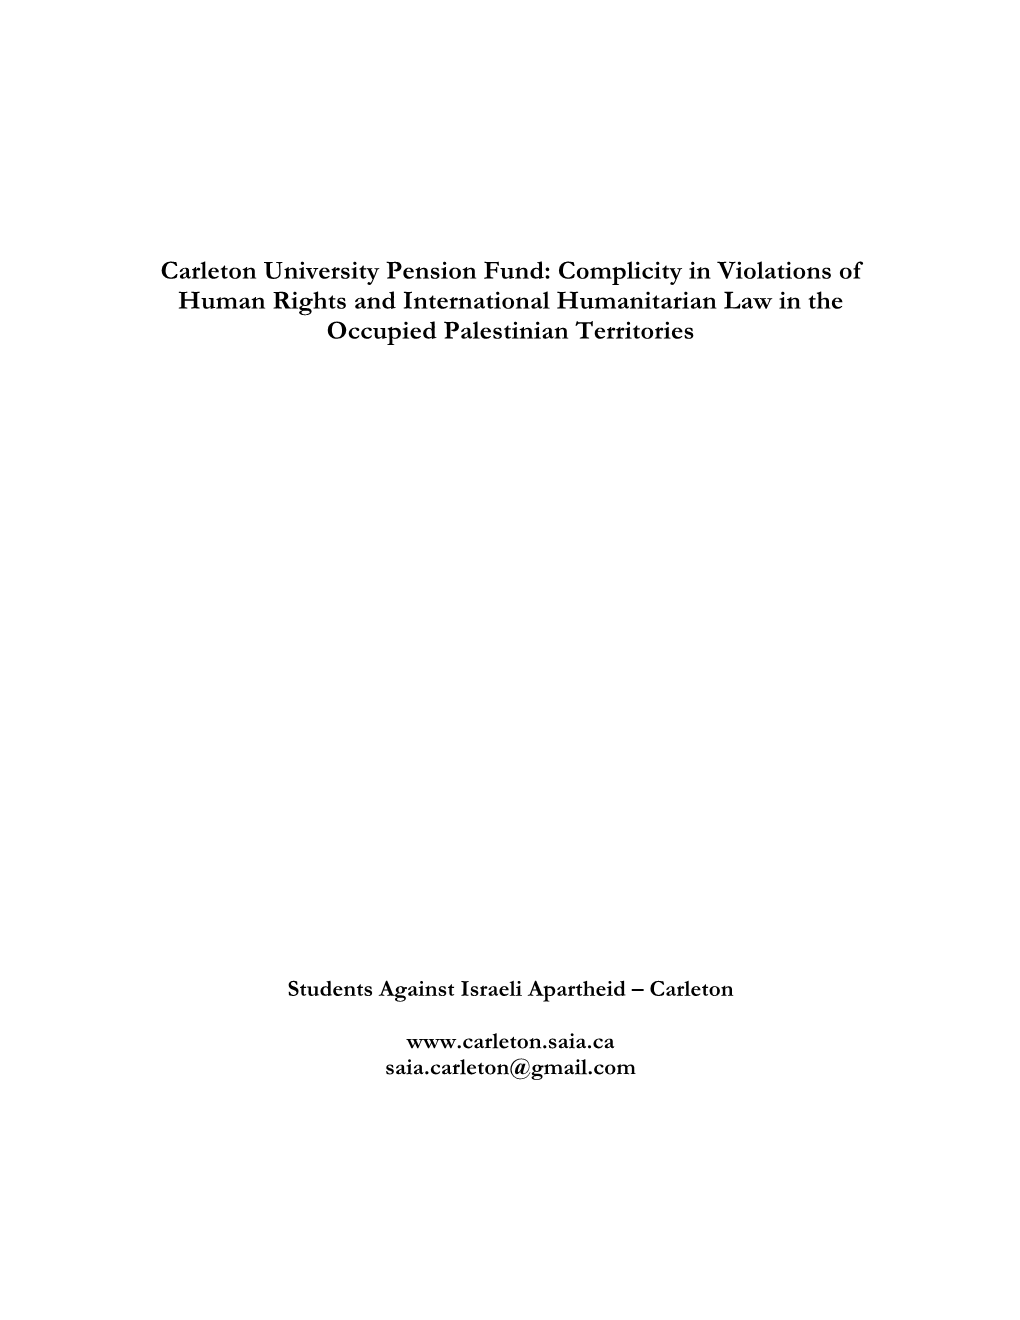 Carleton University Pension Fund: Complicity in Violations of Human Rights and International Humanitarian Law in the Occupied Palestinian Territories